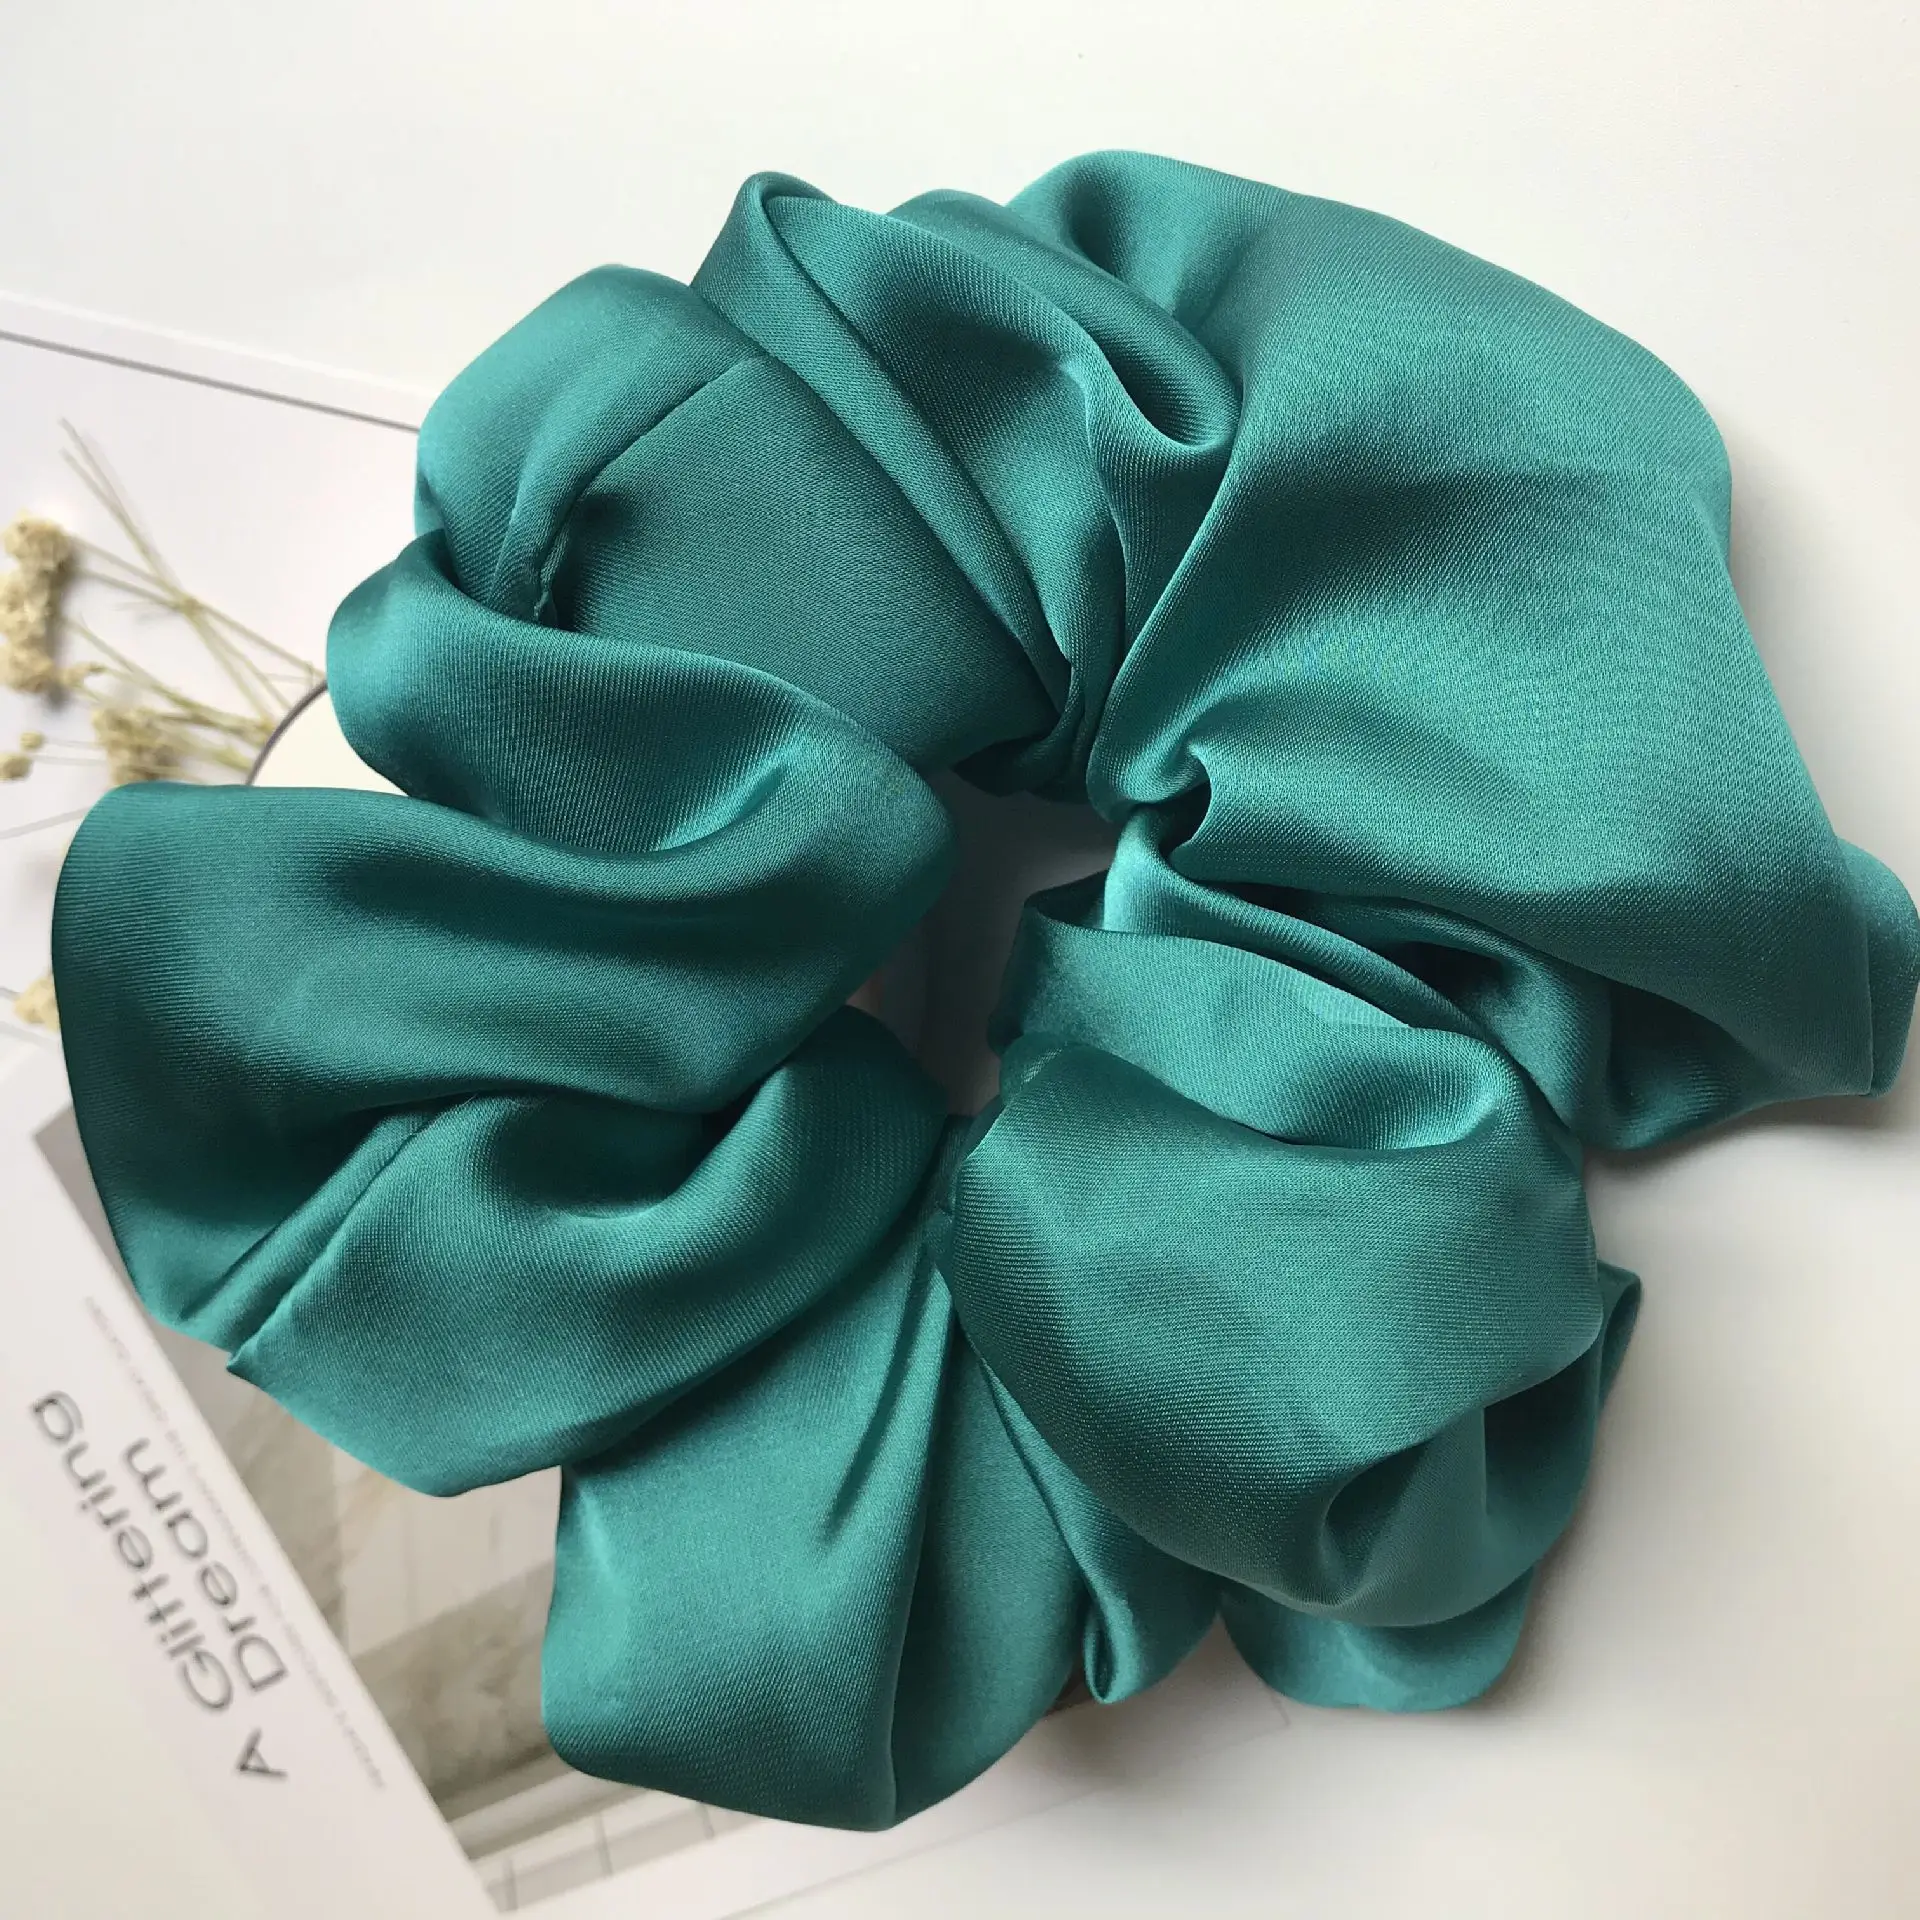 hair bow for ladies Oversized Scrunchies Polyester Material Solid color Women Big Hair Ties Elastic Hair Bands Gir Ponytail Holder Hair Accessories gold hair clips Hair Accessories